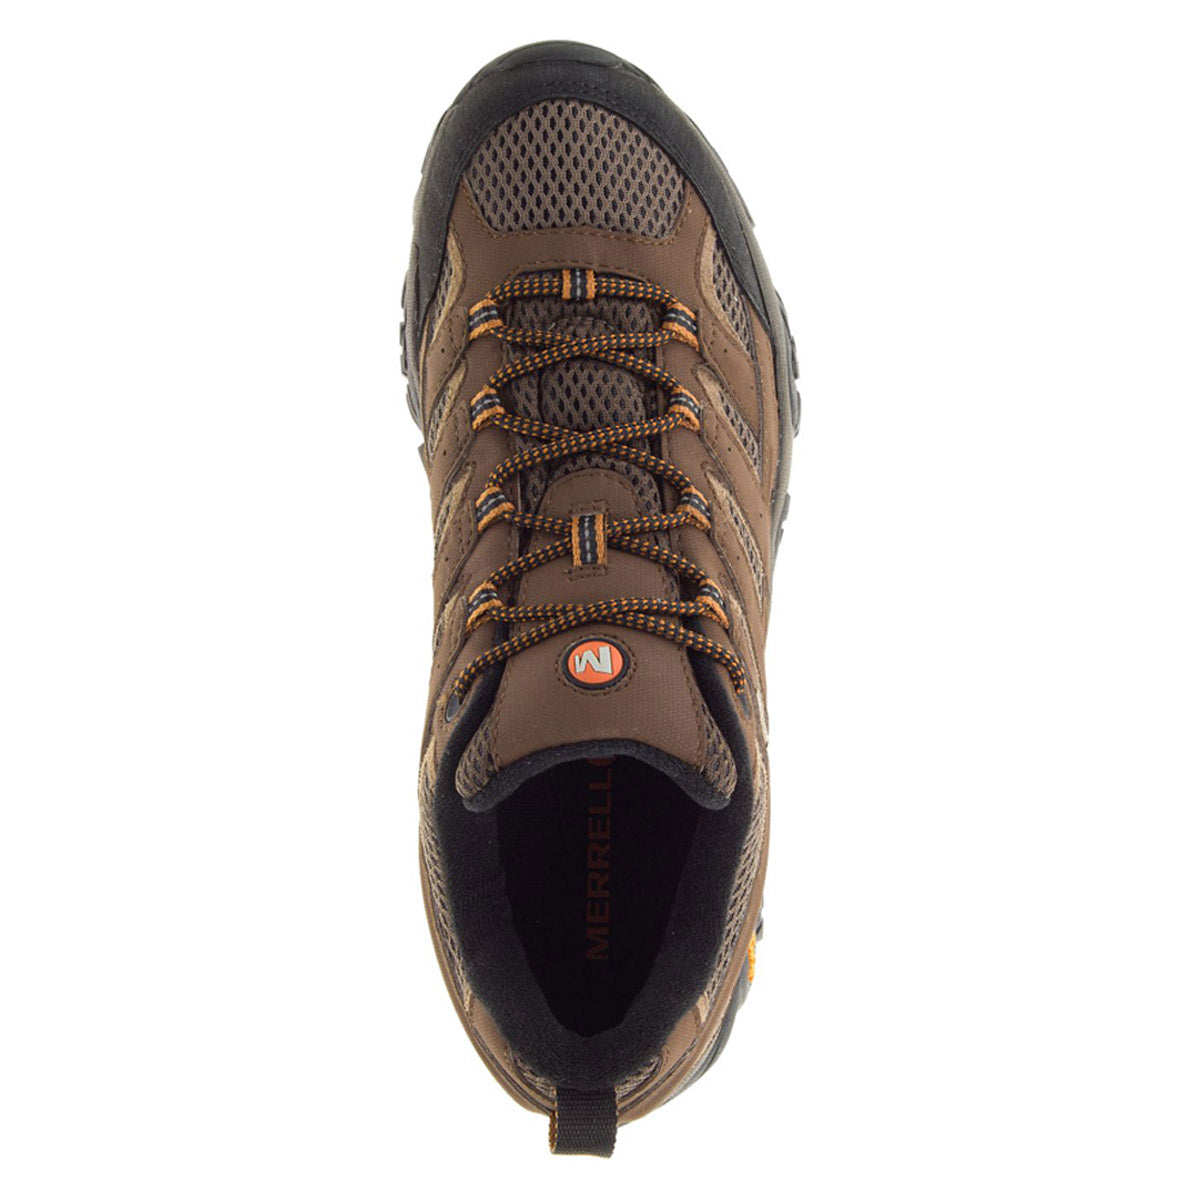 Top view of a brown Merrell Moab 2 Low GTX Earth hiking shoe with laces.